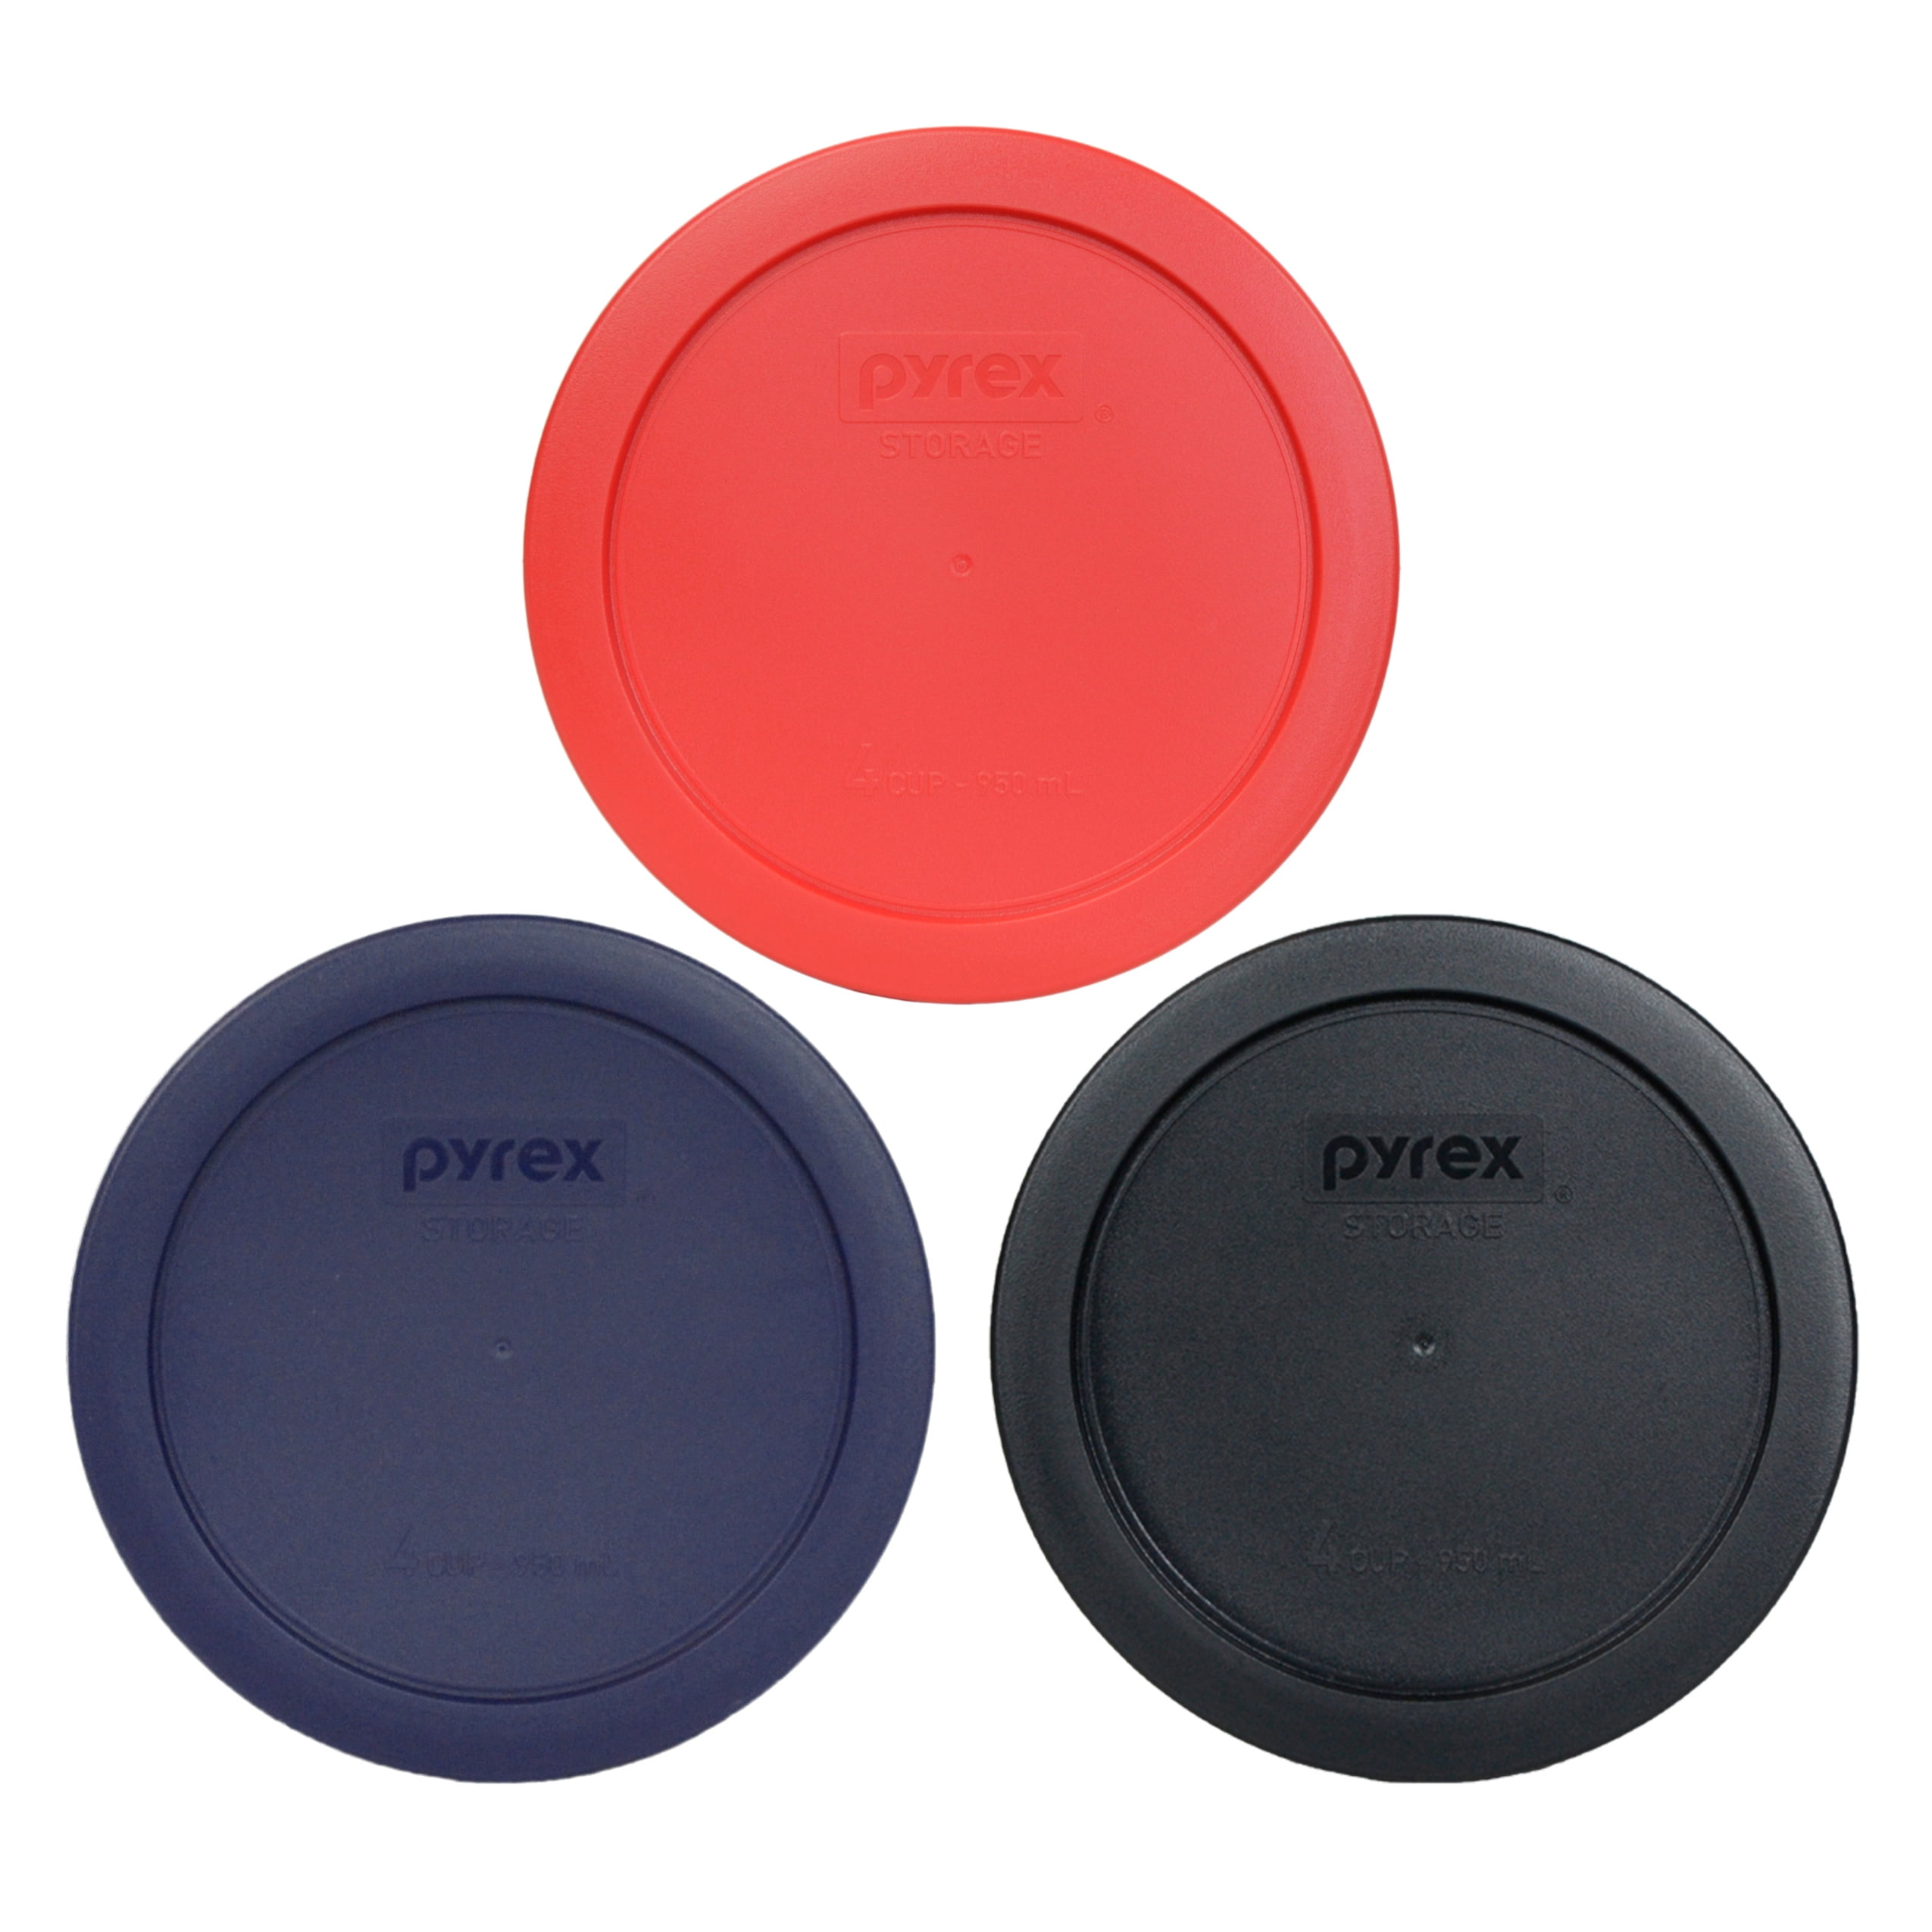 Pyrex 7201-PC 6" Red Round Plastic Cover Lid 2 Pack New for 4 Cup Glass Bowl 